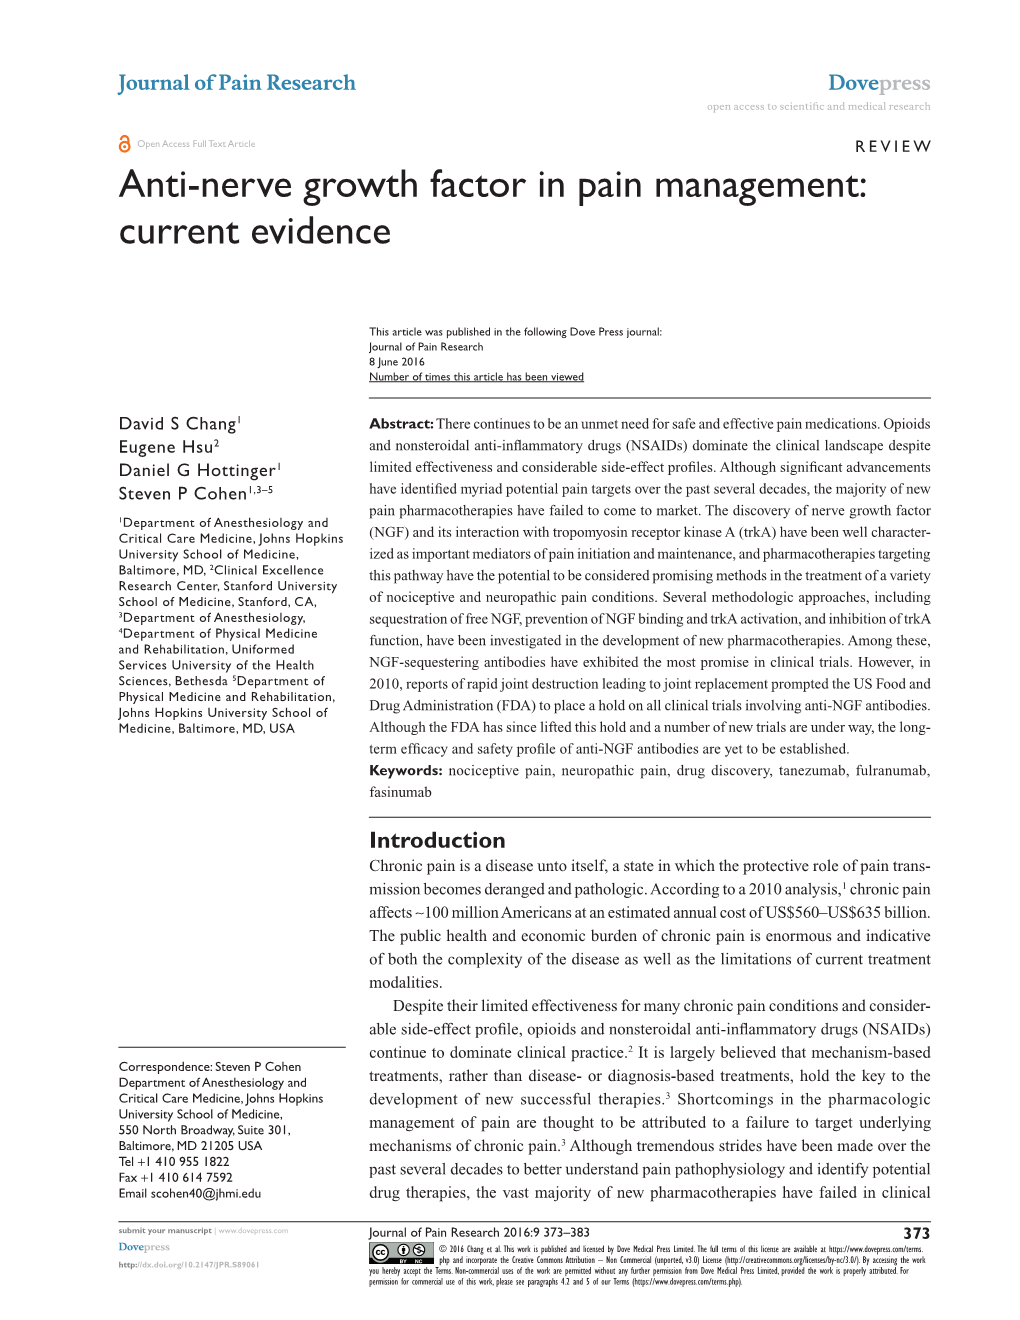 Anti-Nerve Growth Factor in Pain Management: Current Evidence